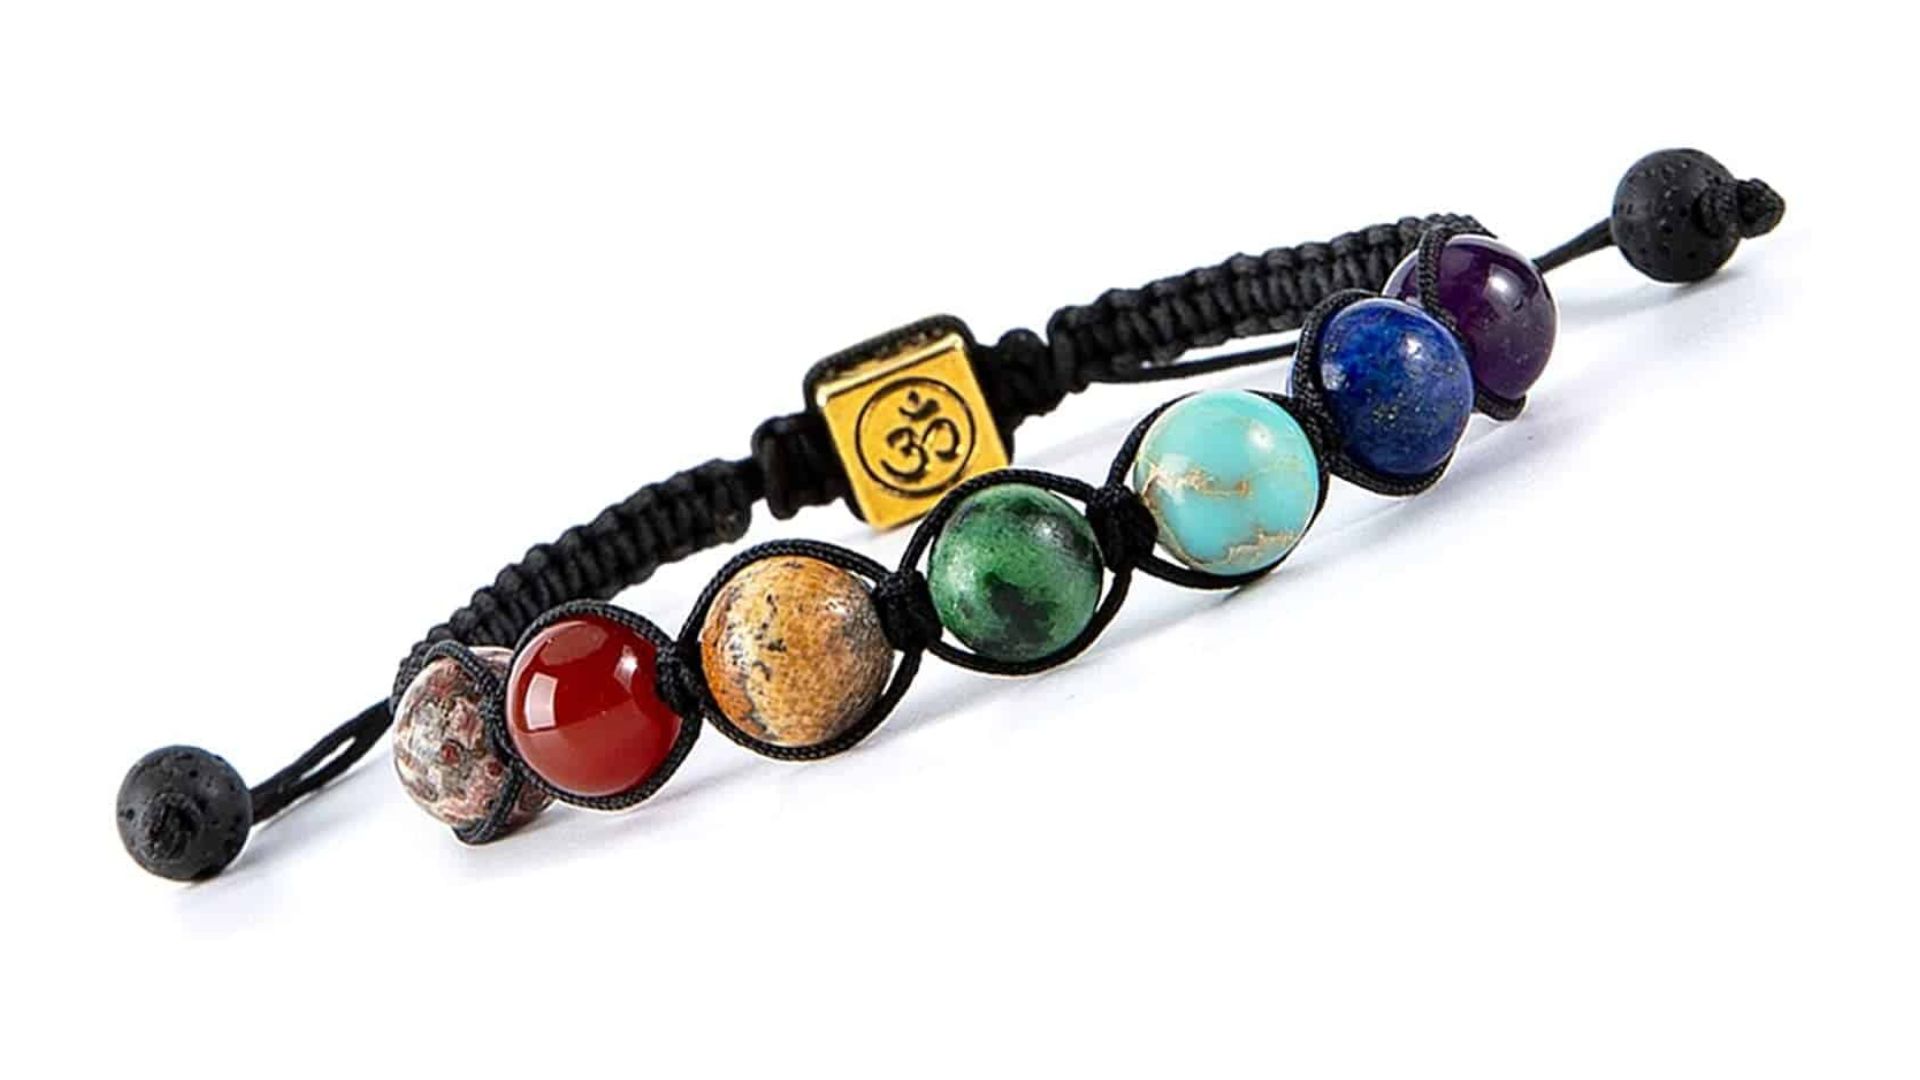 Chakra Bracelets - A Popular Form Of Healing Jewelry That Combines The Power Of Gemstones